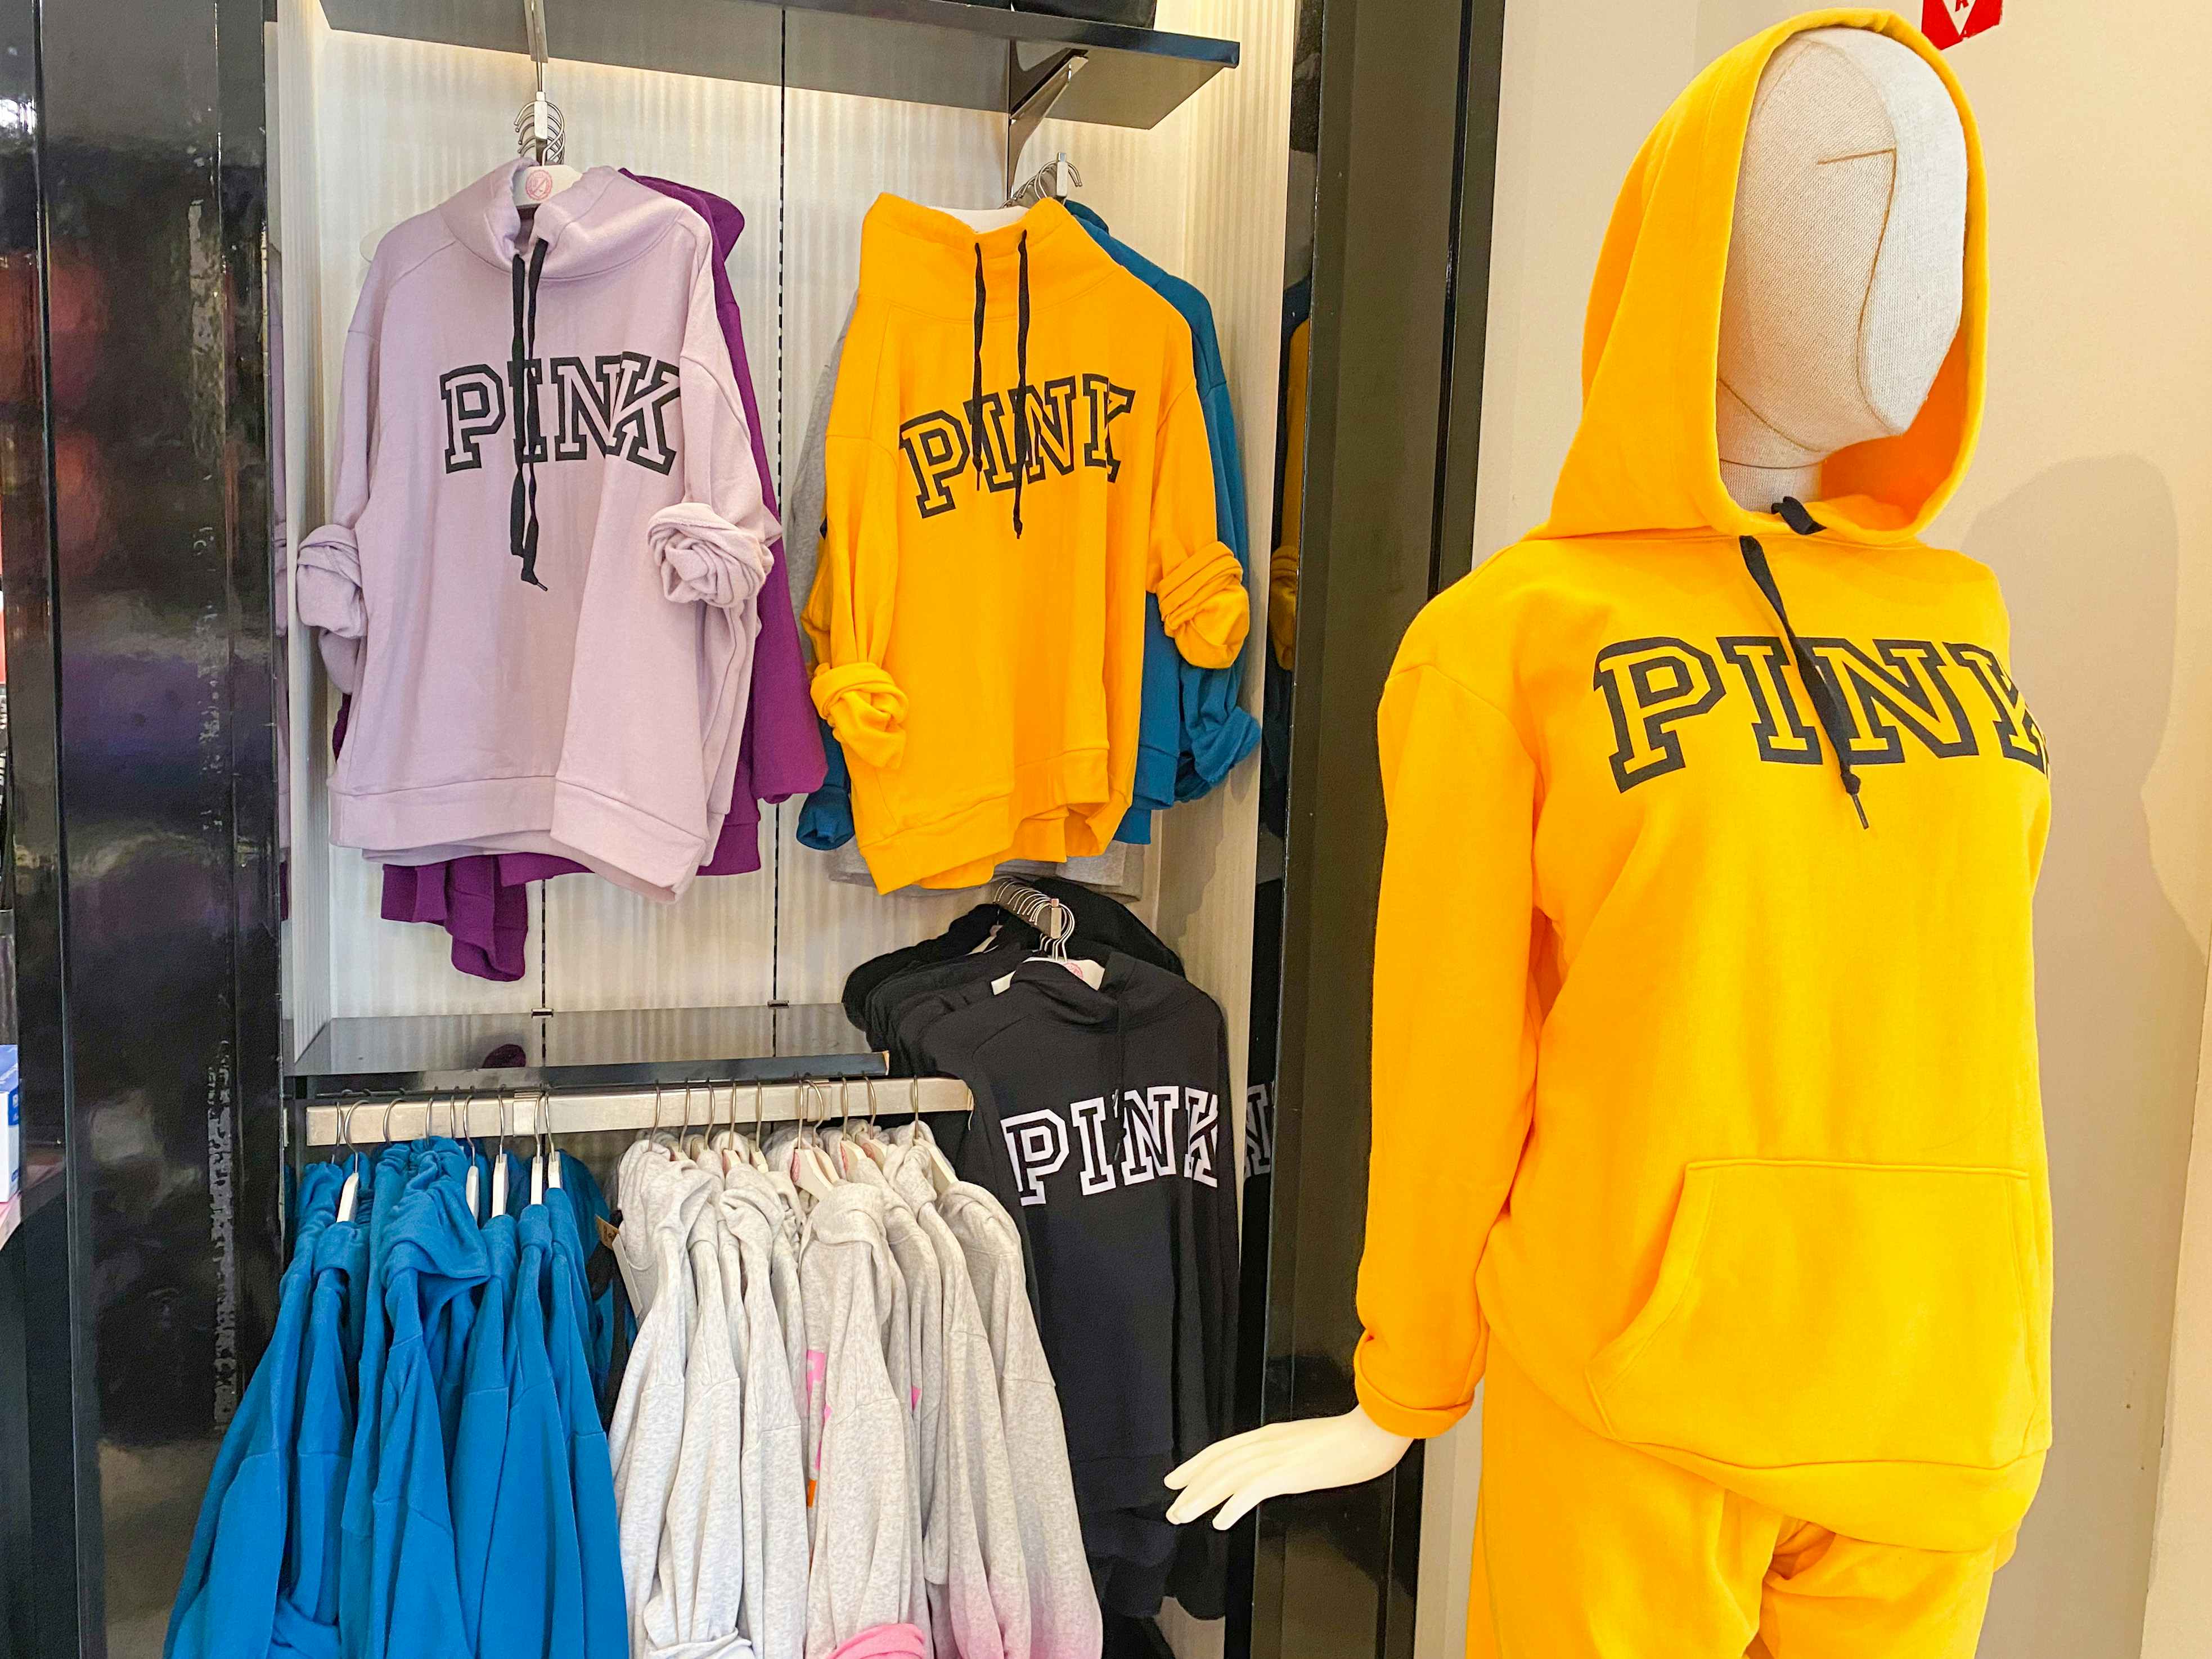 Some PINK brand hoodies on display in a PINK store.